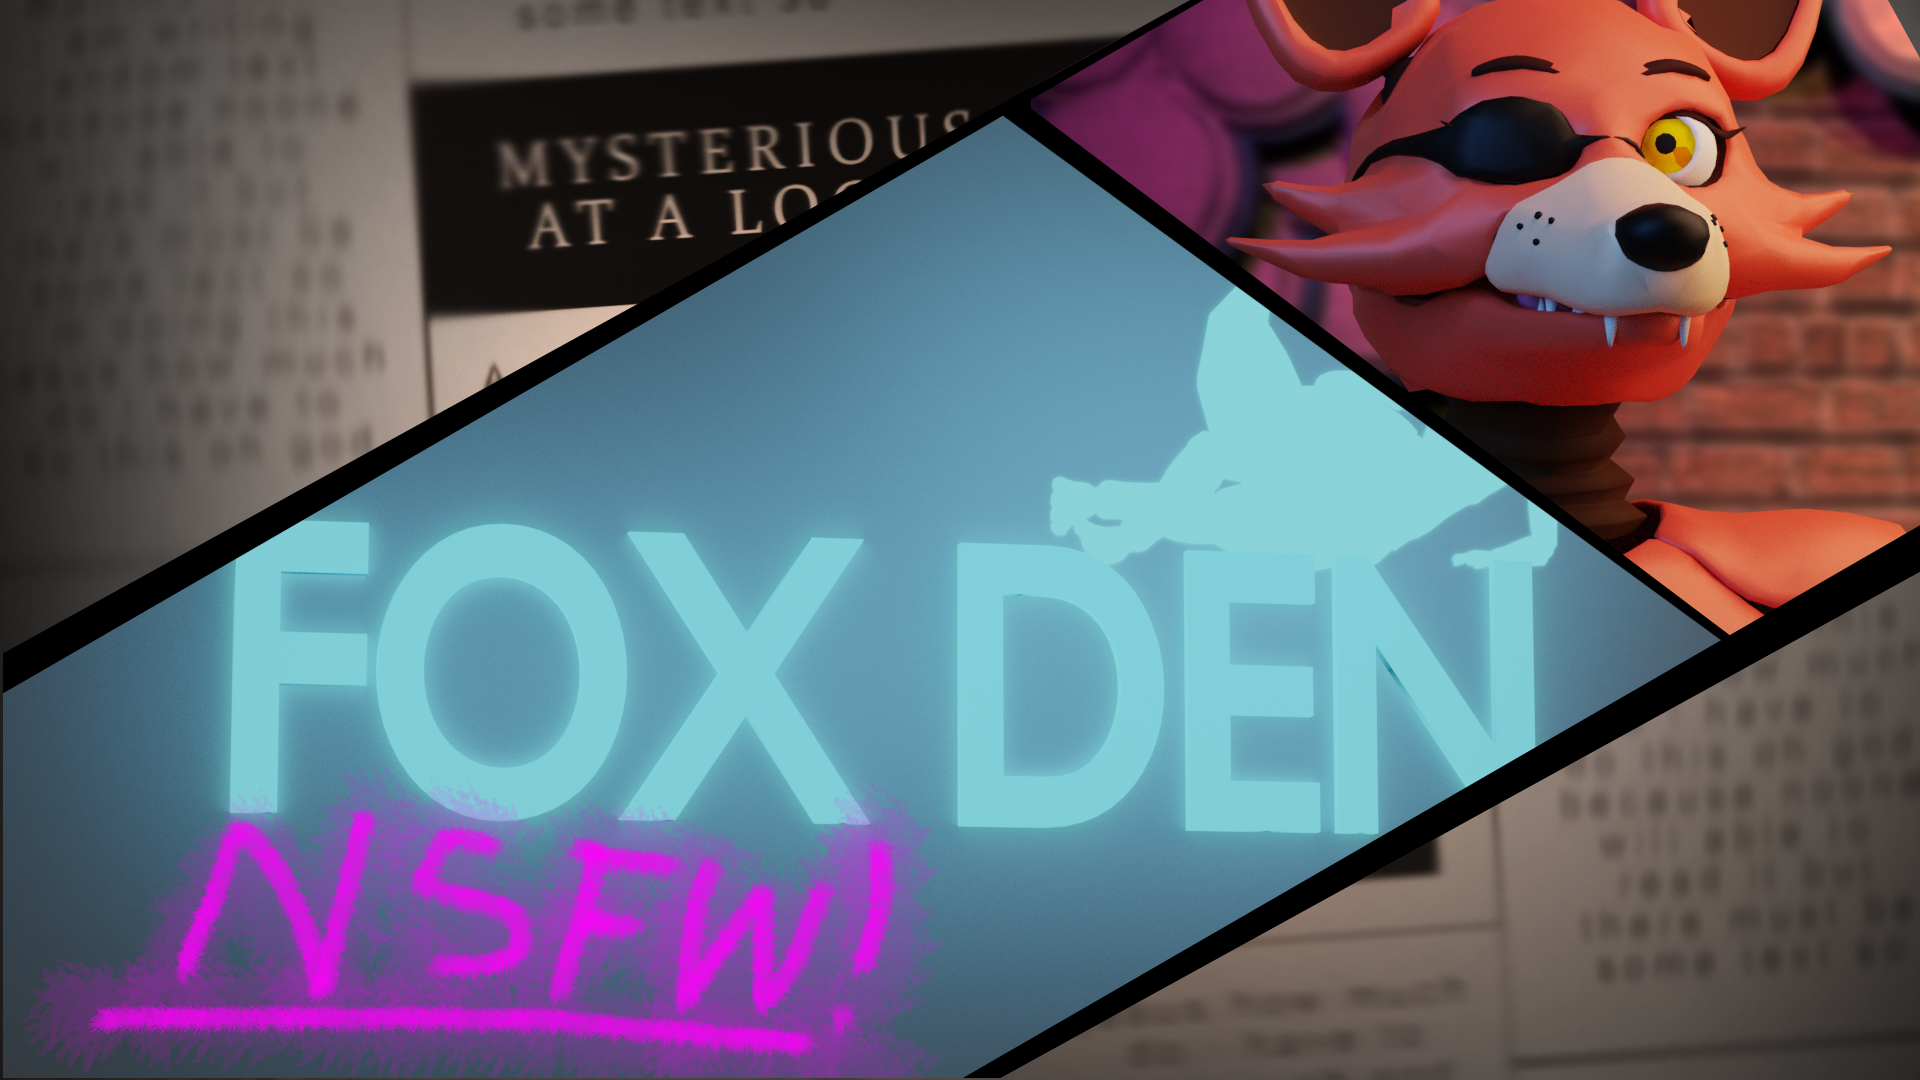 Fox Den by Cosmo Pickle